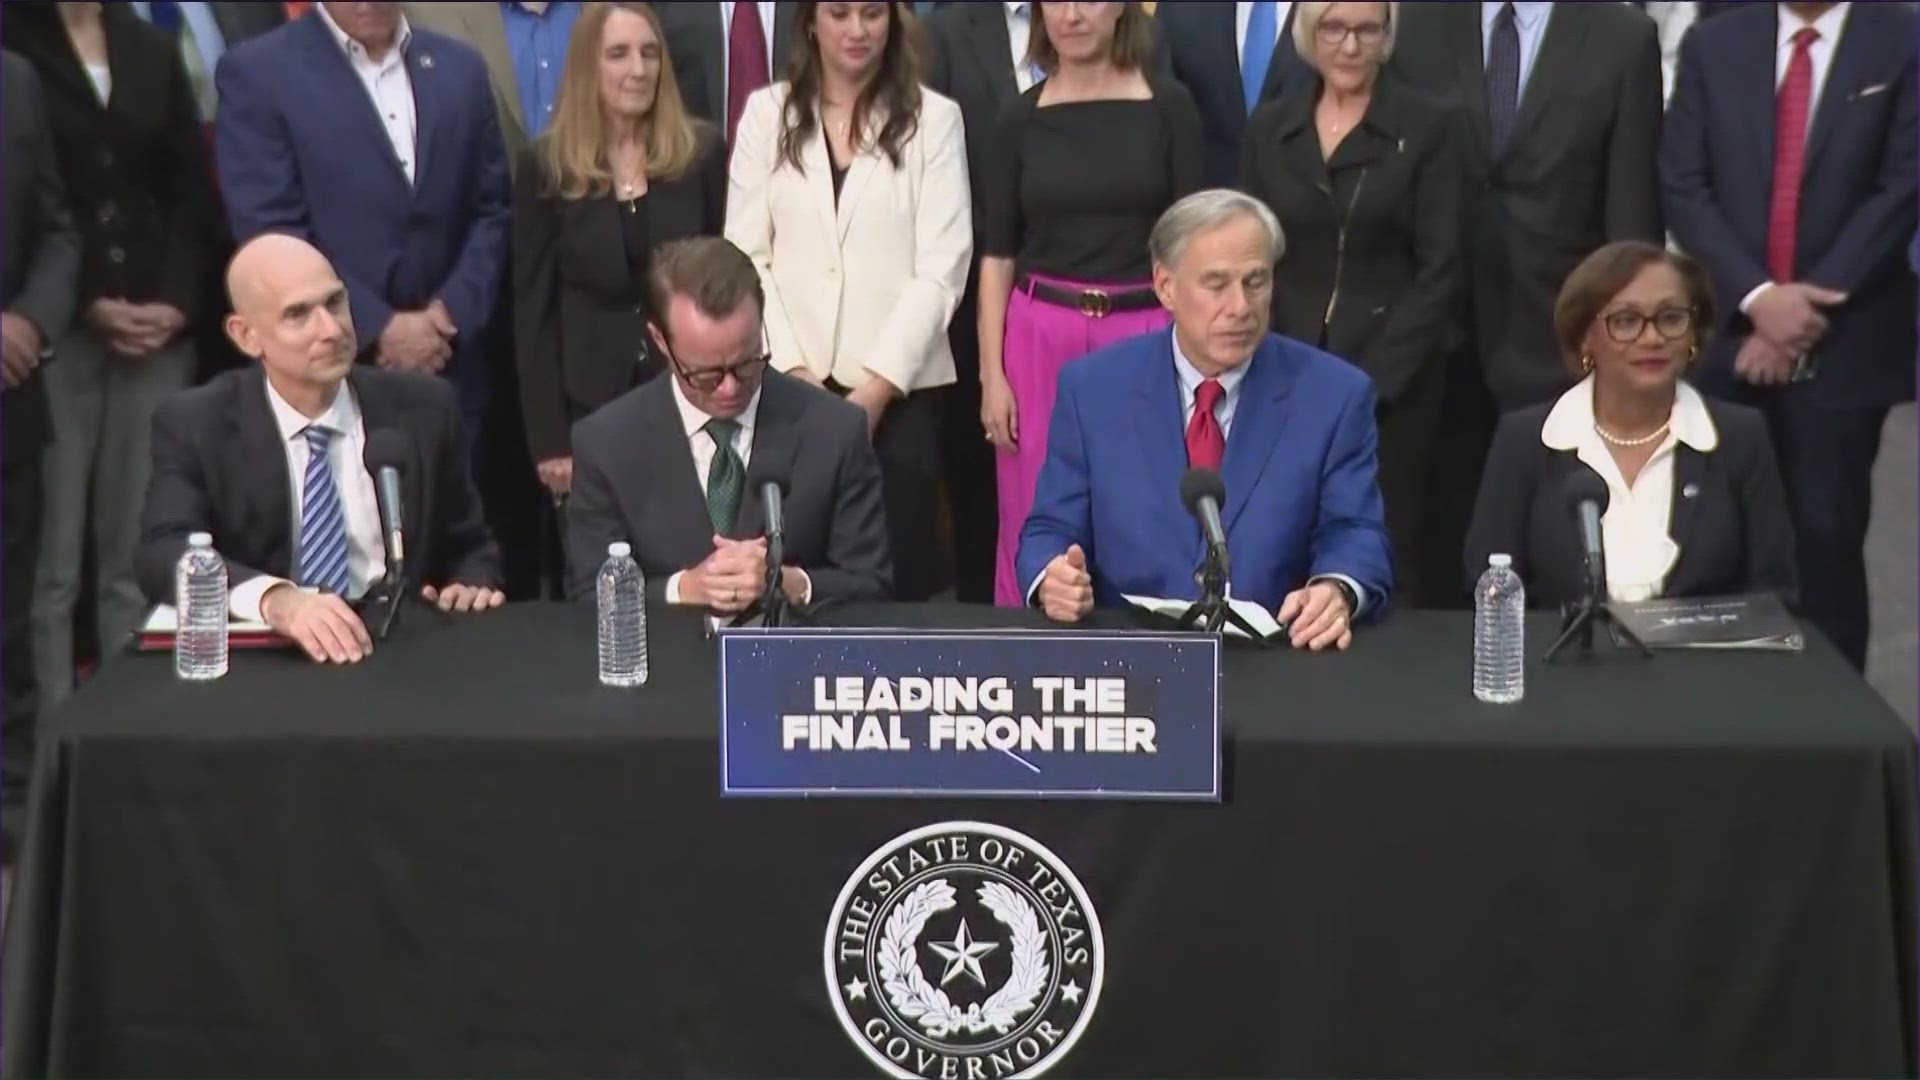 Gov. Greg Abbott announced the creation of the Texas Space Commission at NASA's Johnson Space Center in Houston.